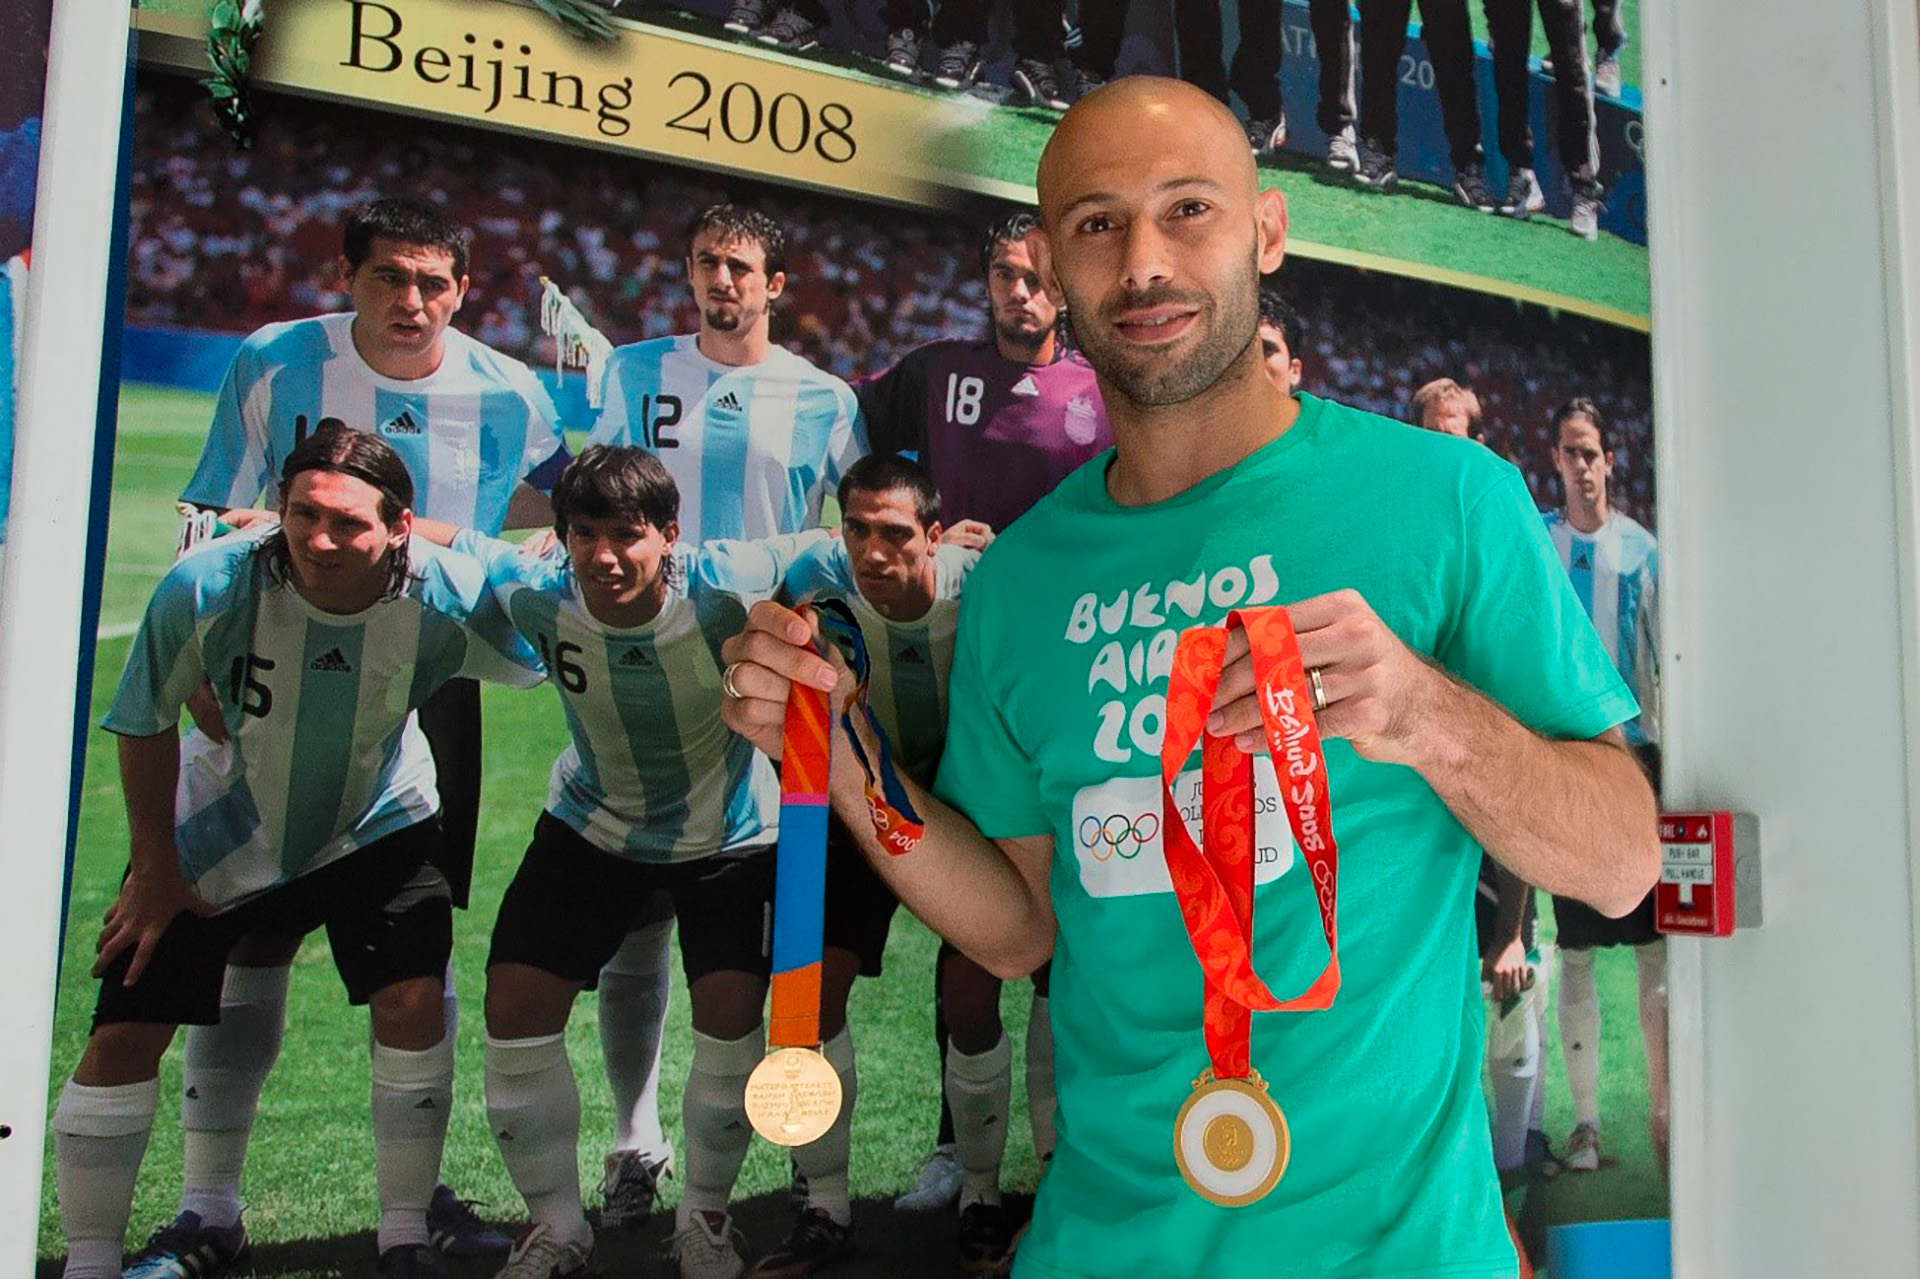 The pose of the two-time champion with his medals. Javier Mascherano, the only Argentine athlete to win two gold Olympic medals.